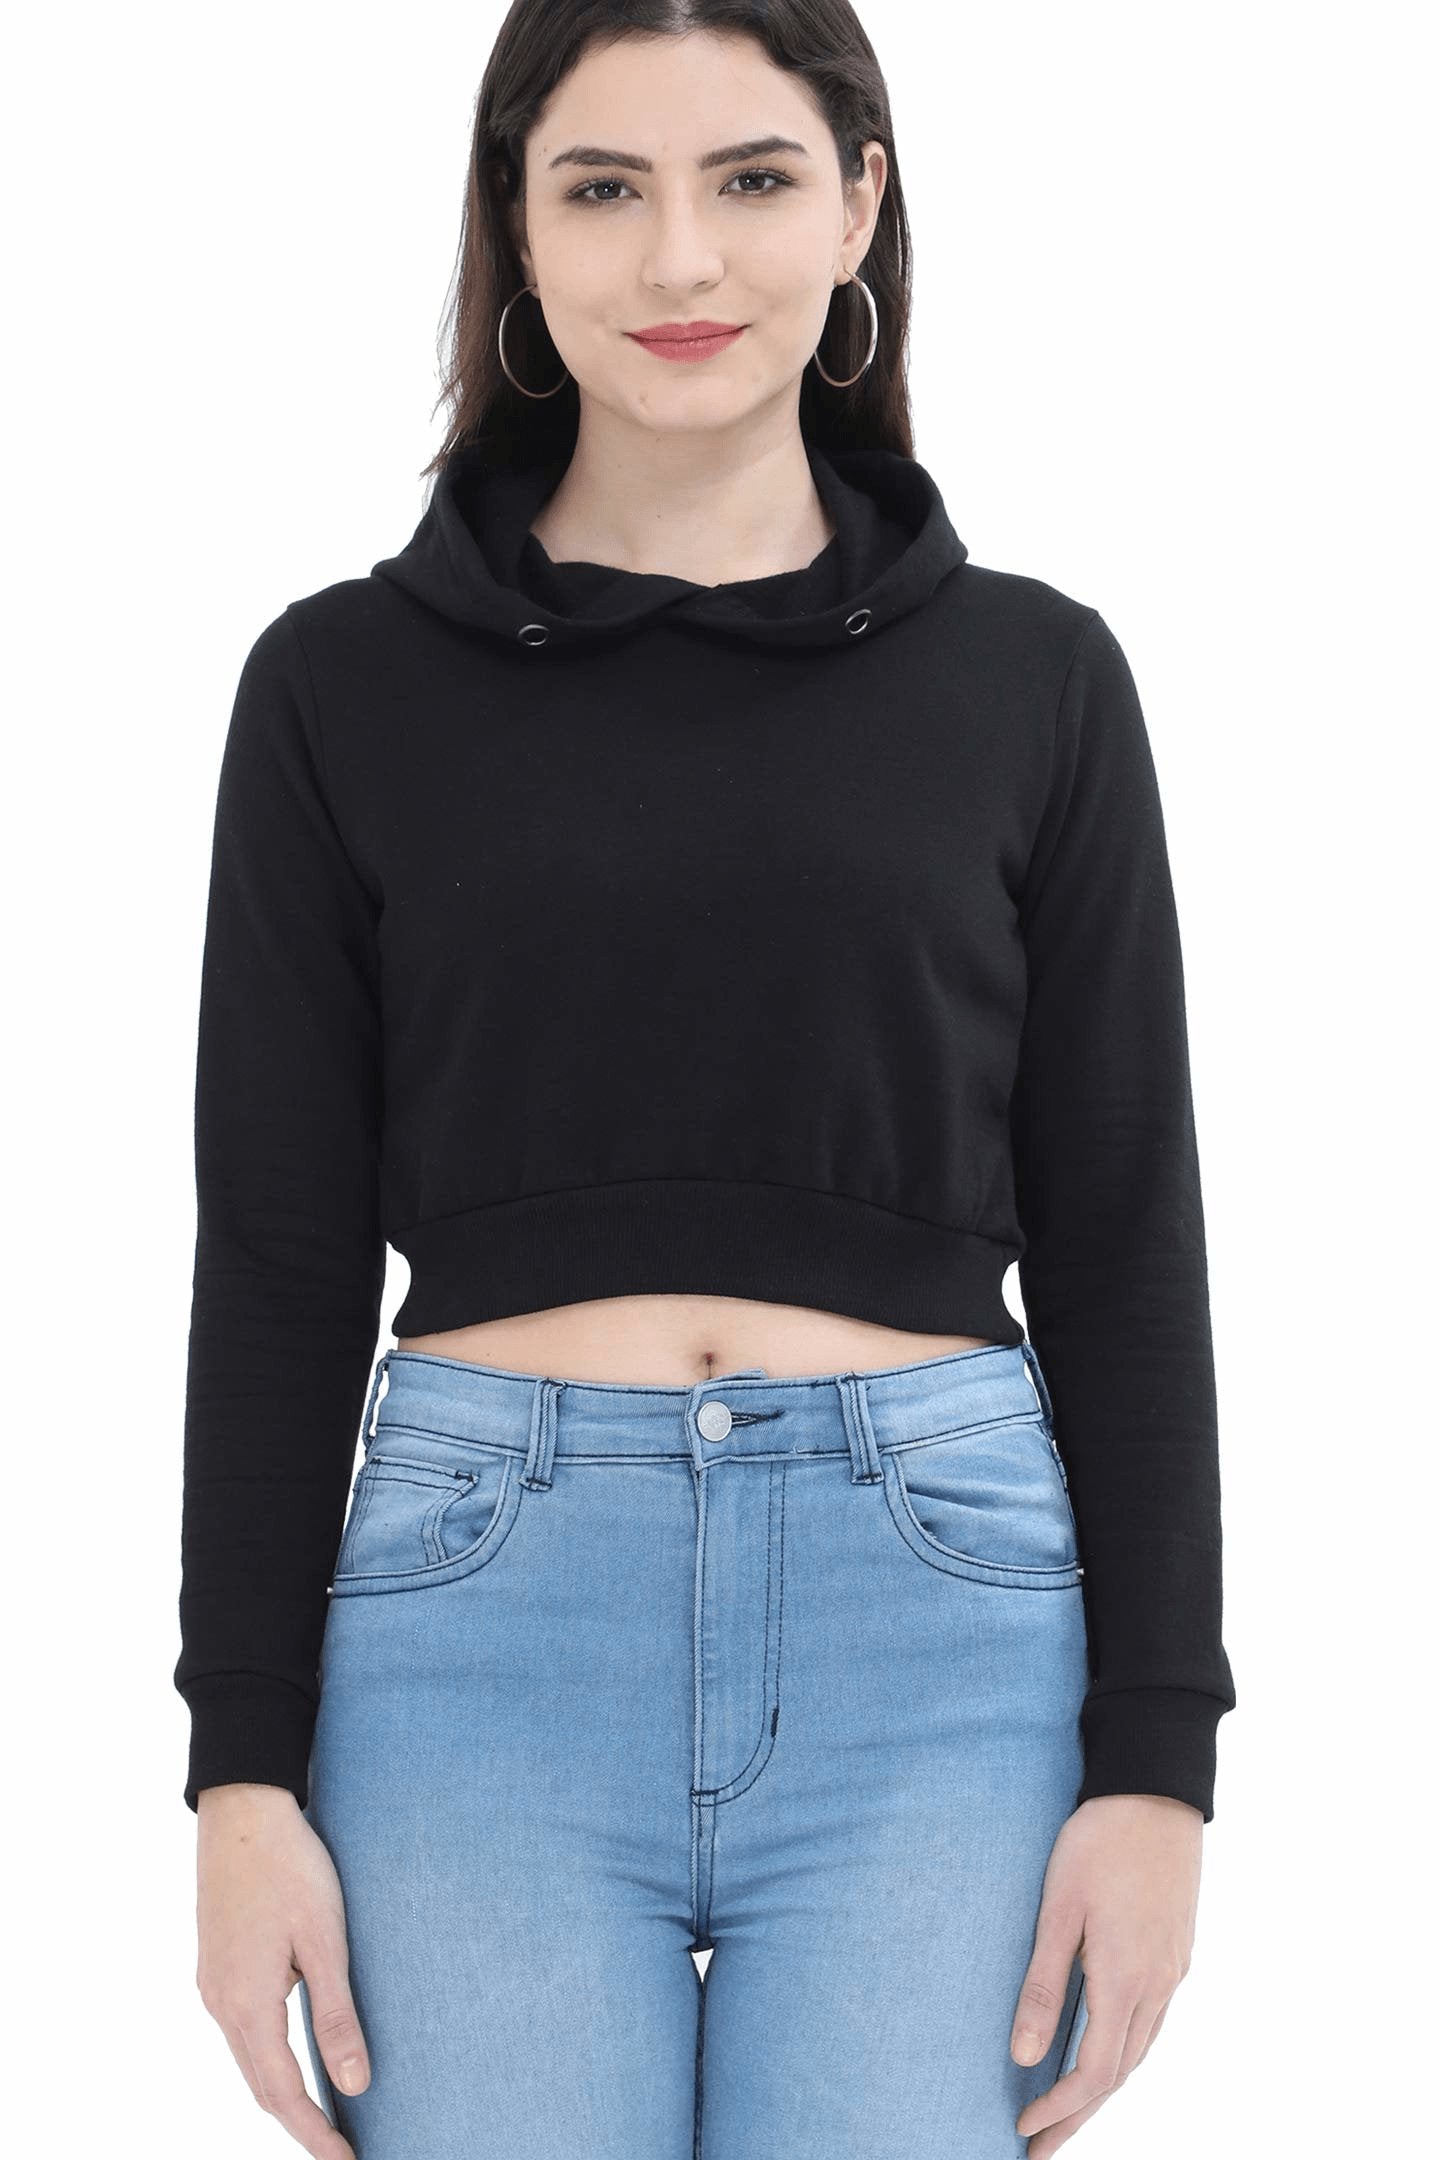 Crop Hoodies - The Vybe Store